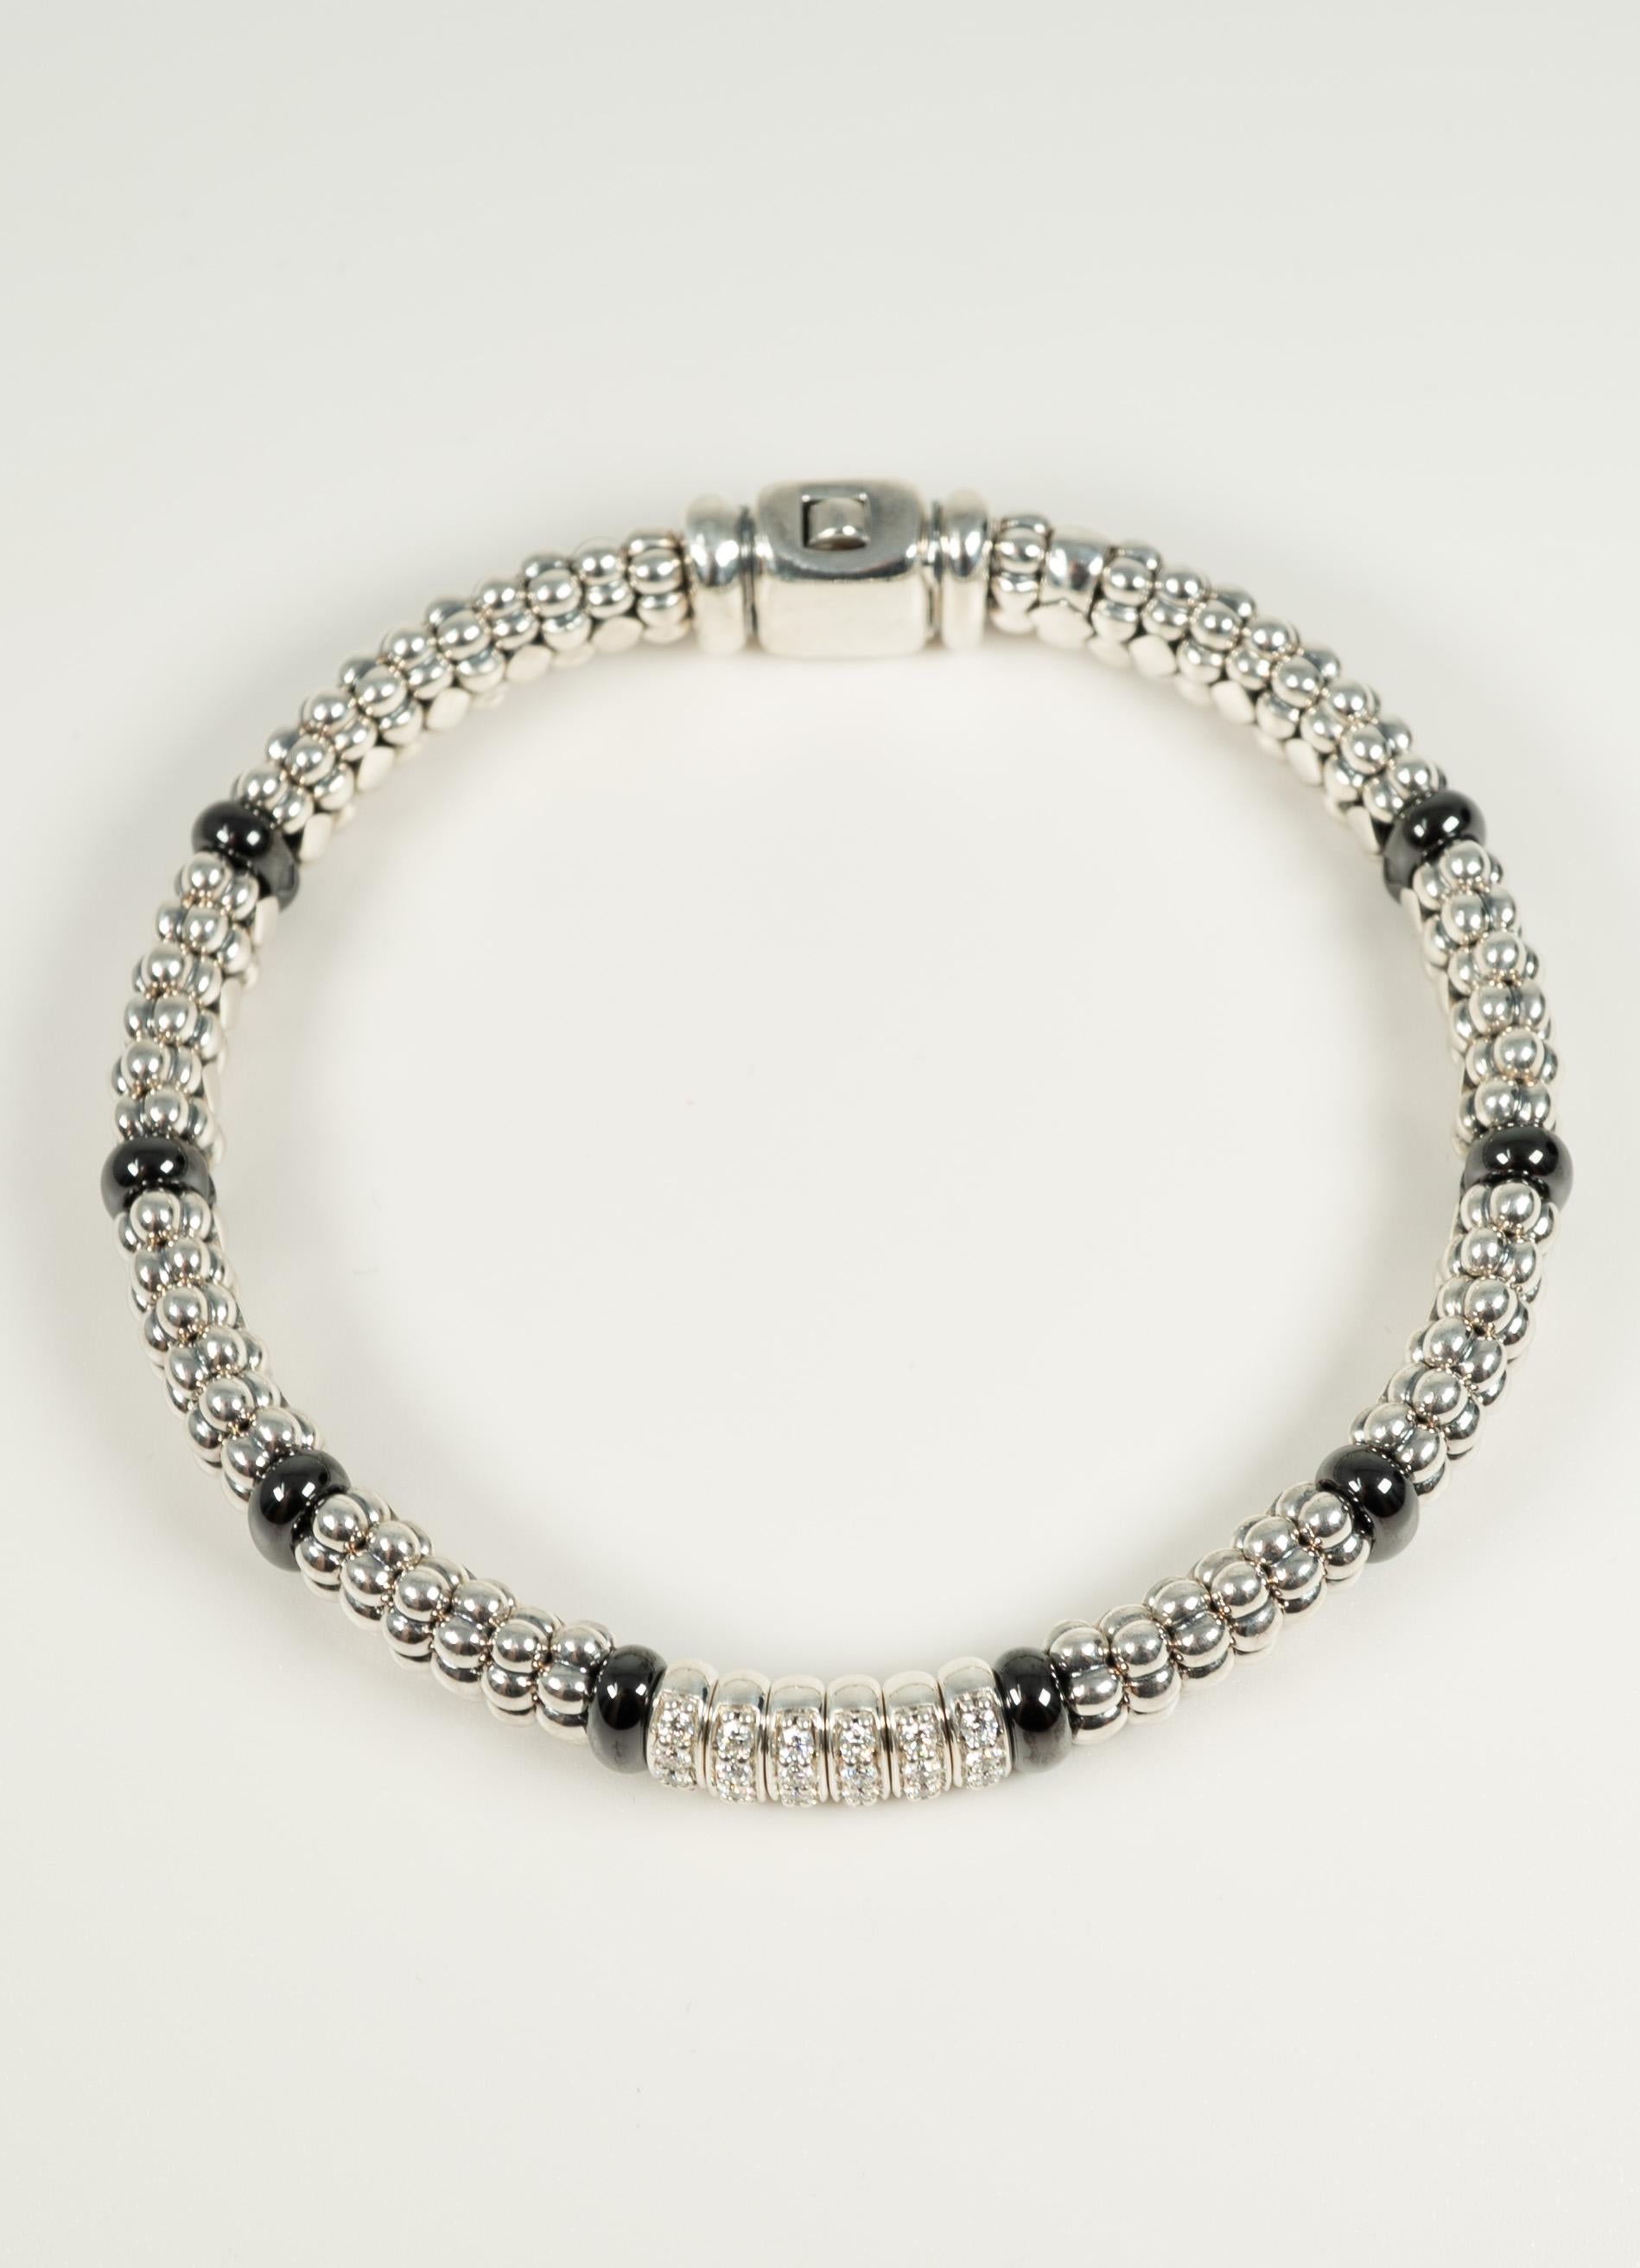 From the Caviar collection by Lagos, this ageless design supports channel-set, diamonds, sterling silver and ceramic beads.